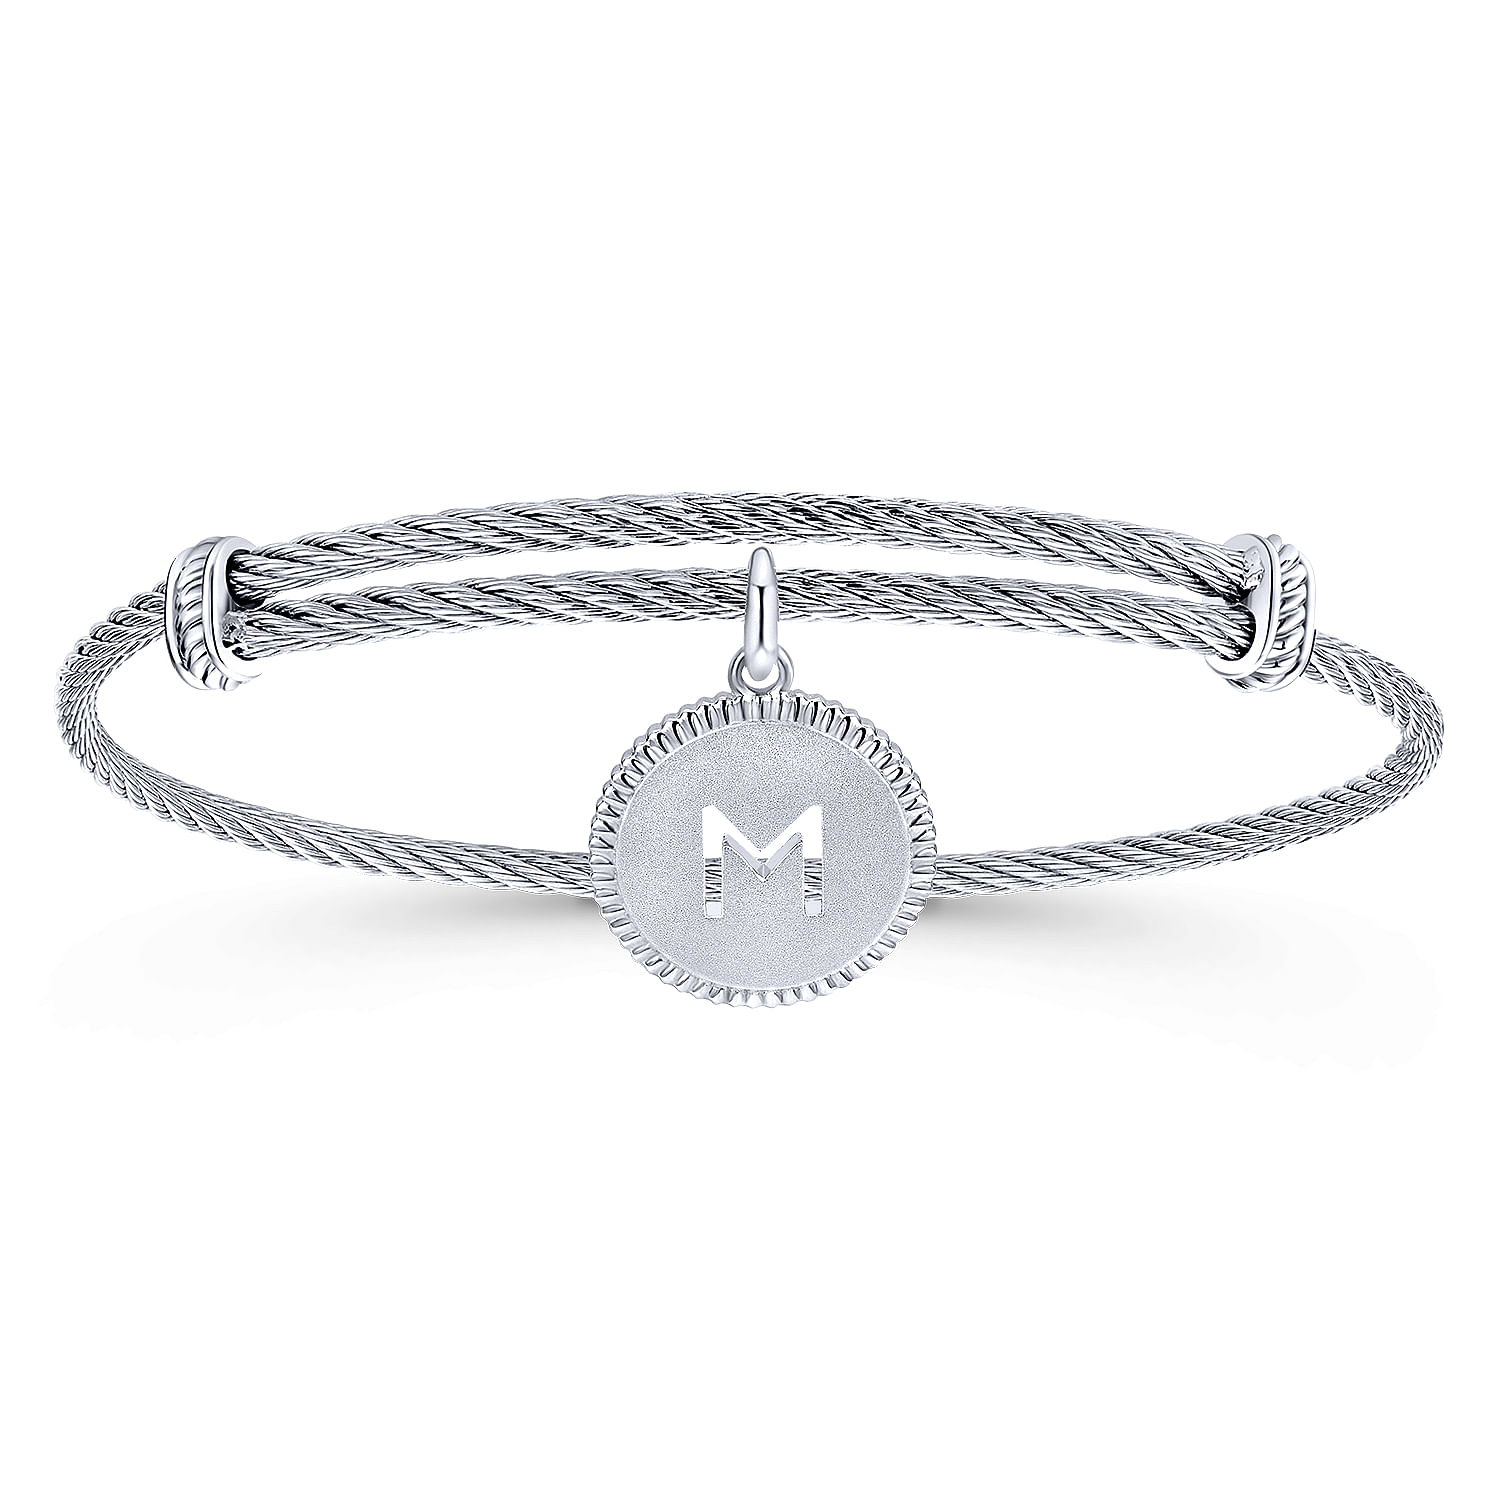 Adjustable Twisted Cable Stainless Steel Bangle with Sterling Silver M Initial Charm